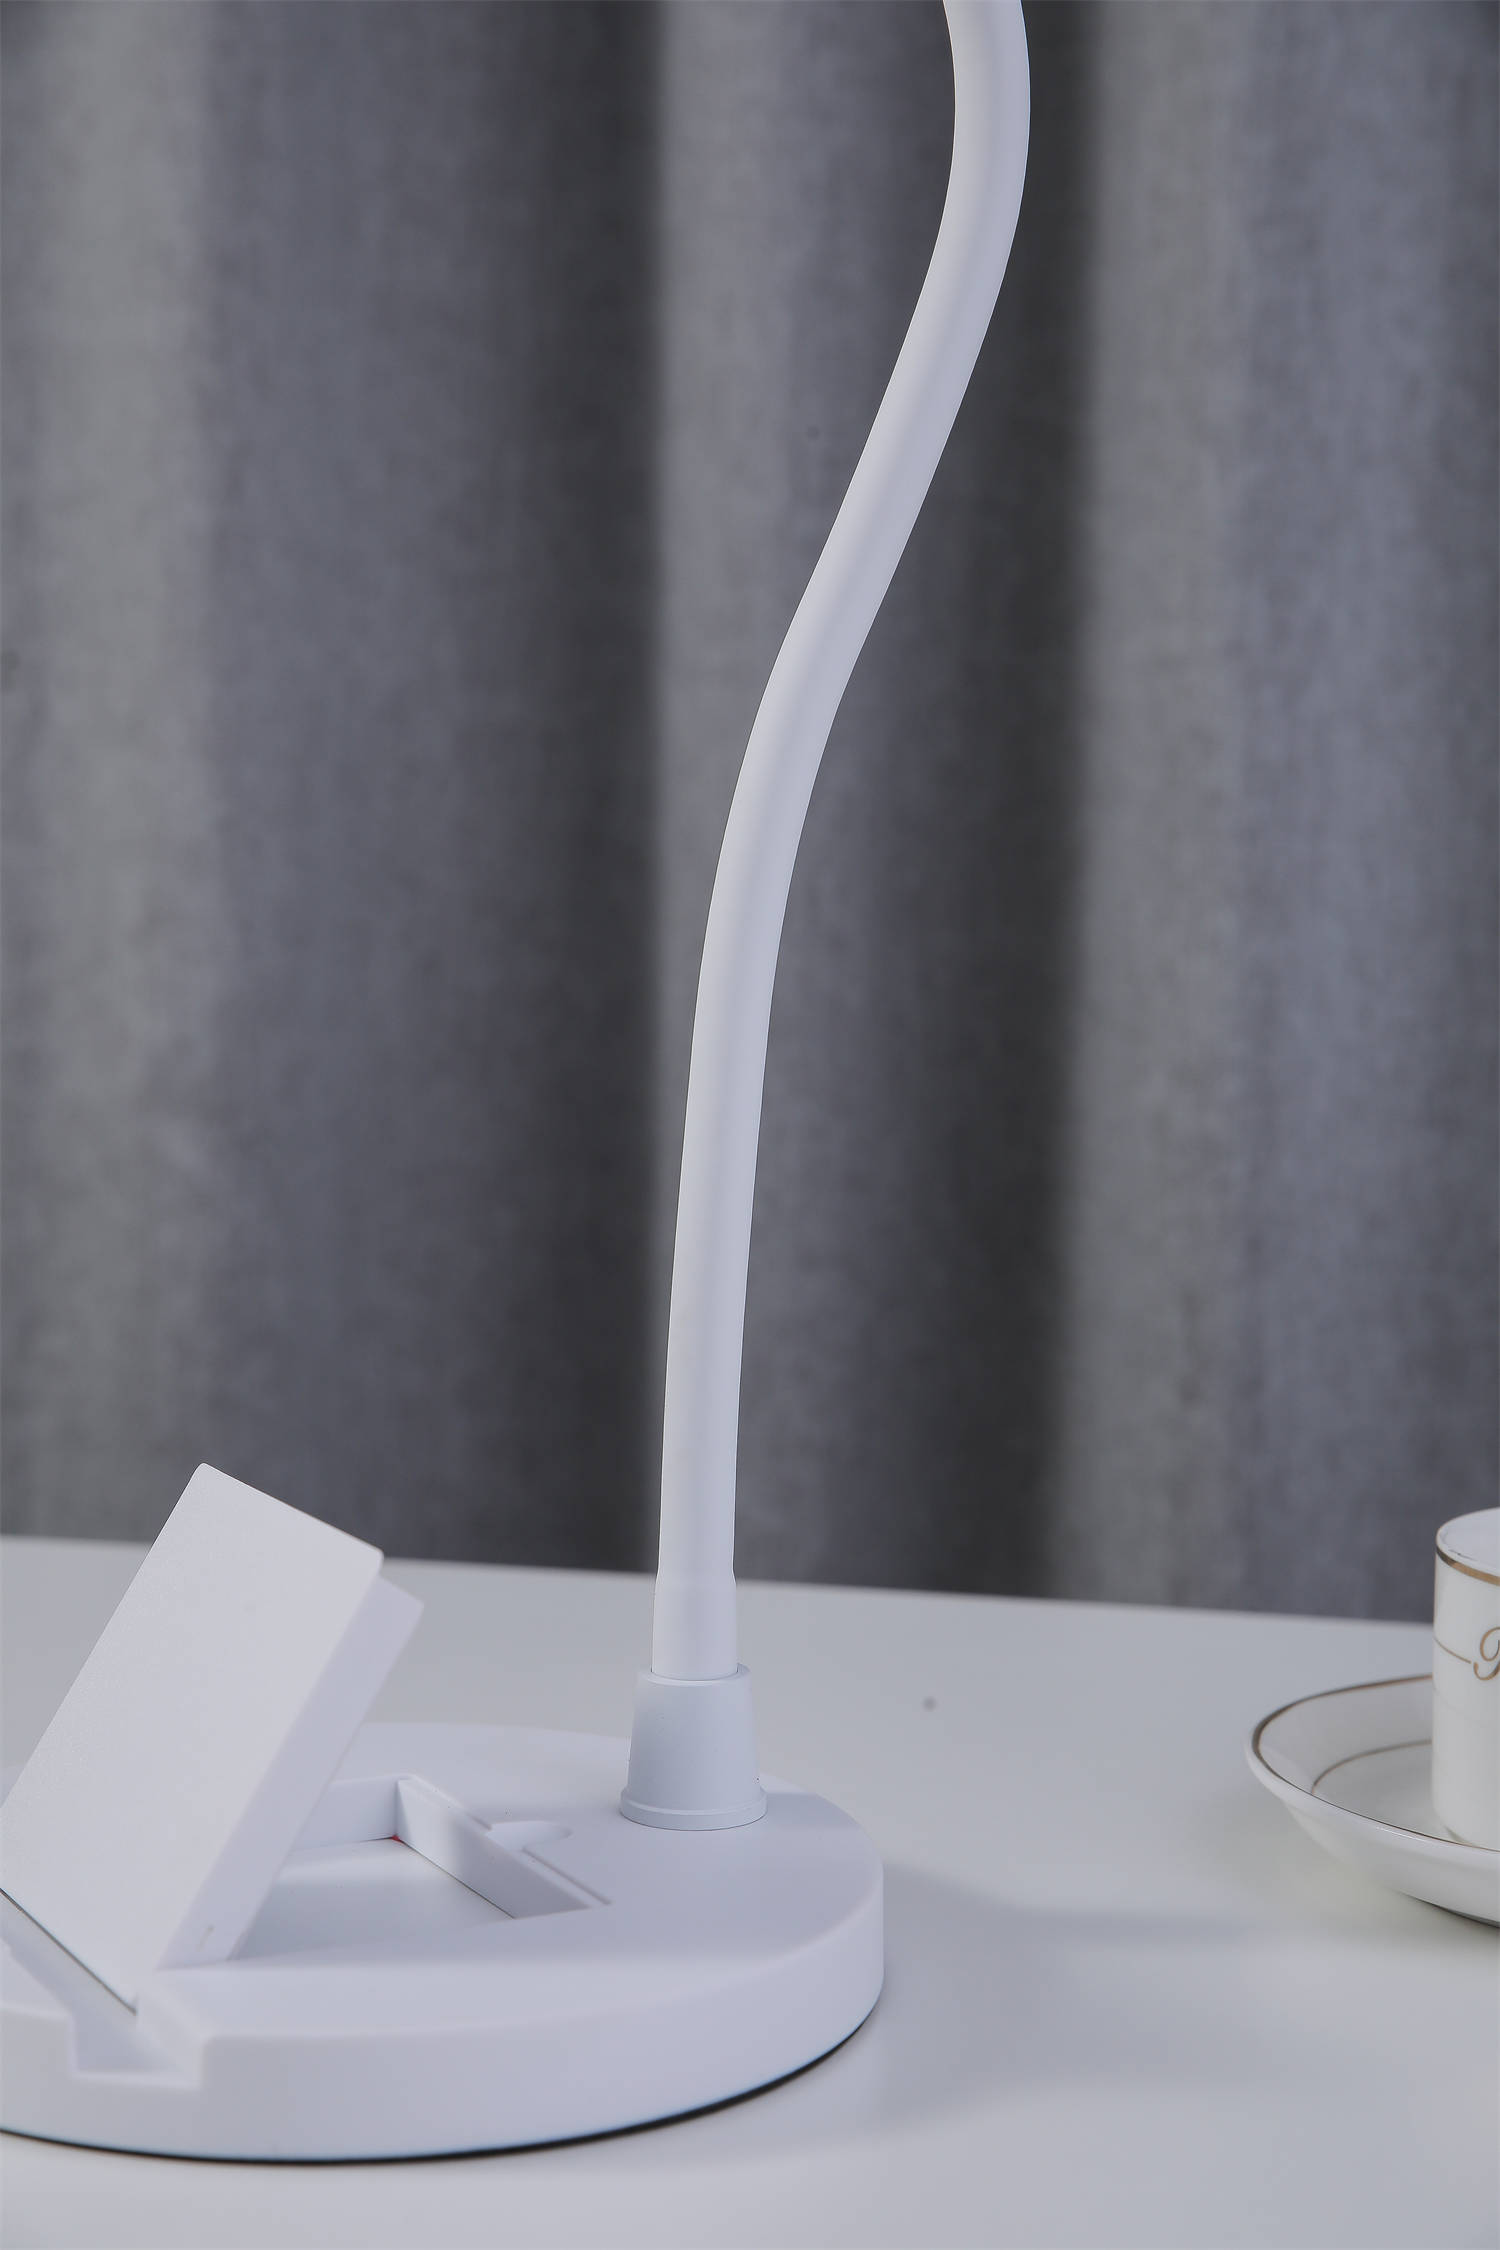 Double Round Shape Designed Desk Lamp with Wireless Rechargeable for Mobile